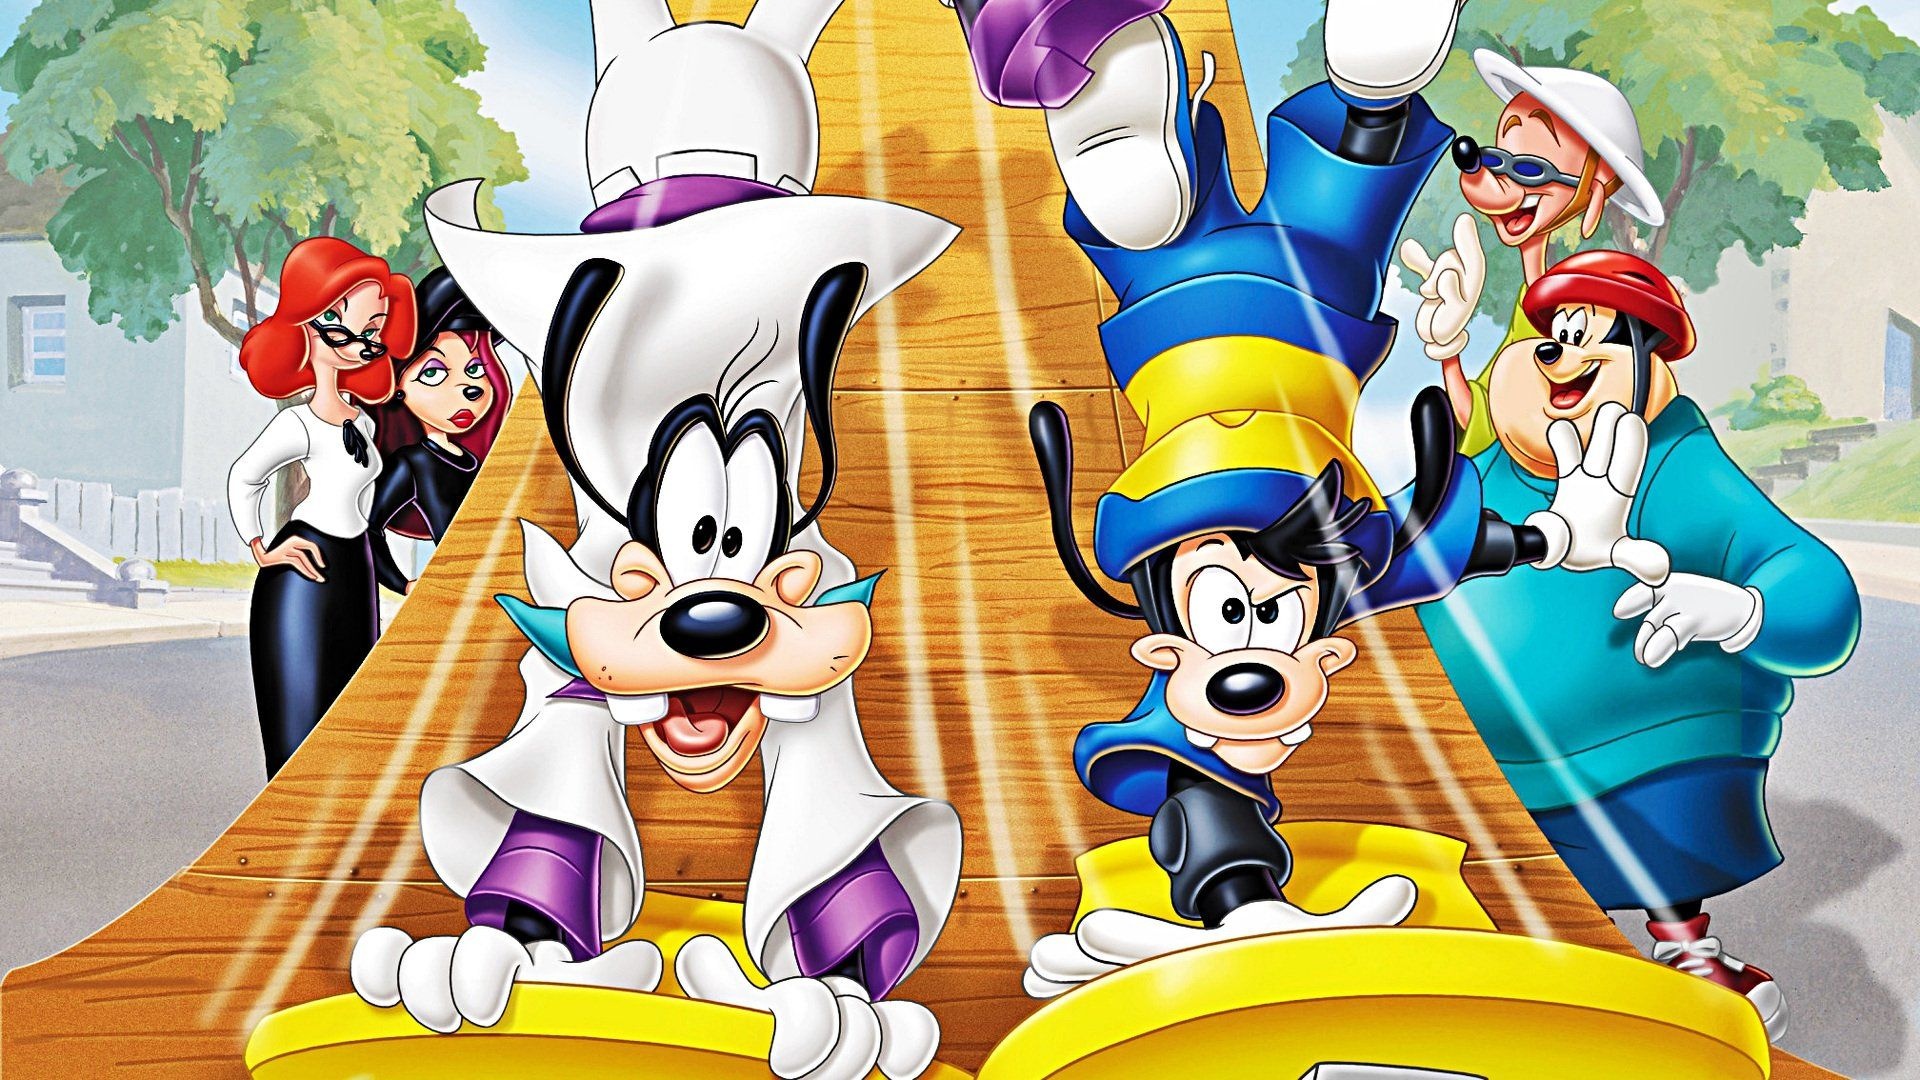 Goof Troop, Extremely Goofy movie, Memorable moments, Animated nostalgia, 1920x1080 Full HD Desktop